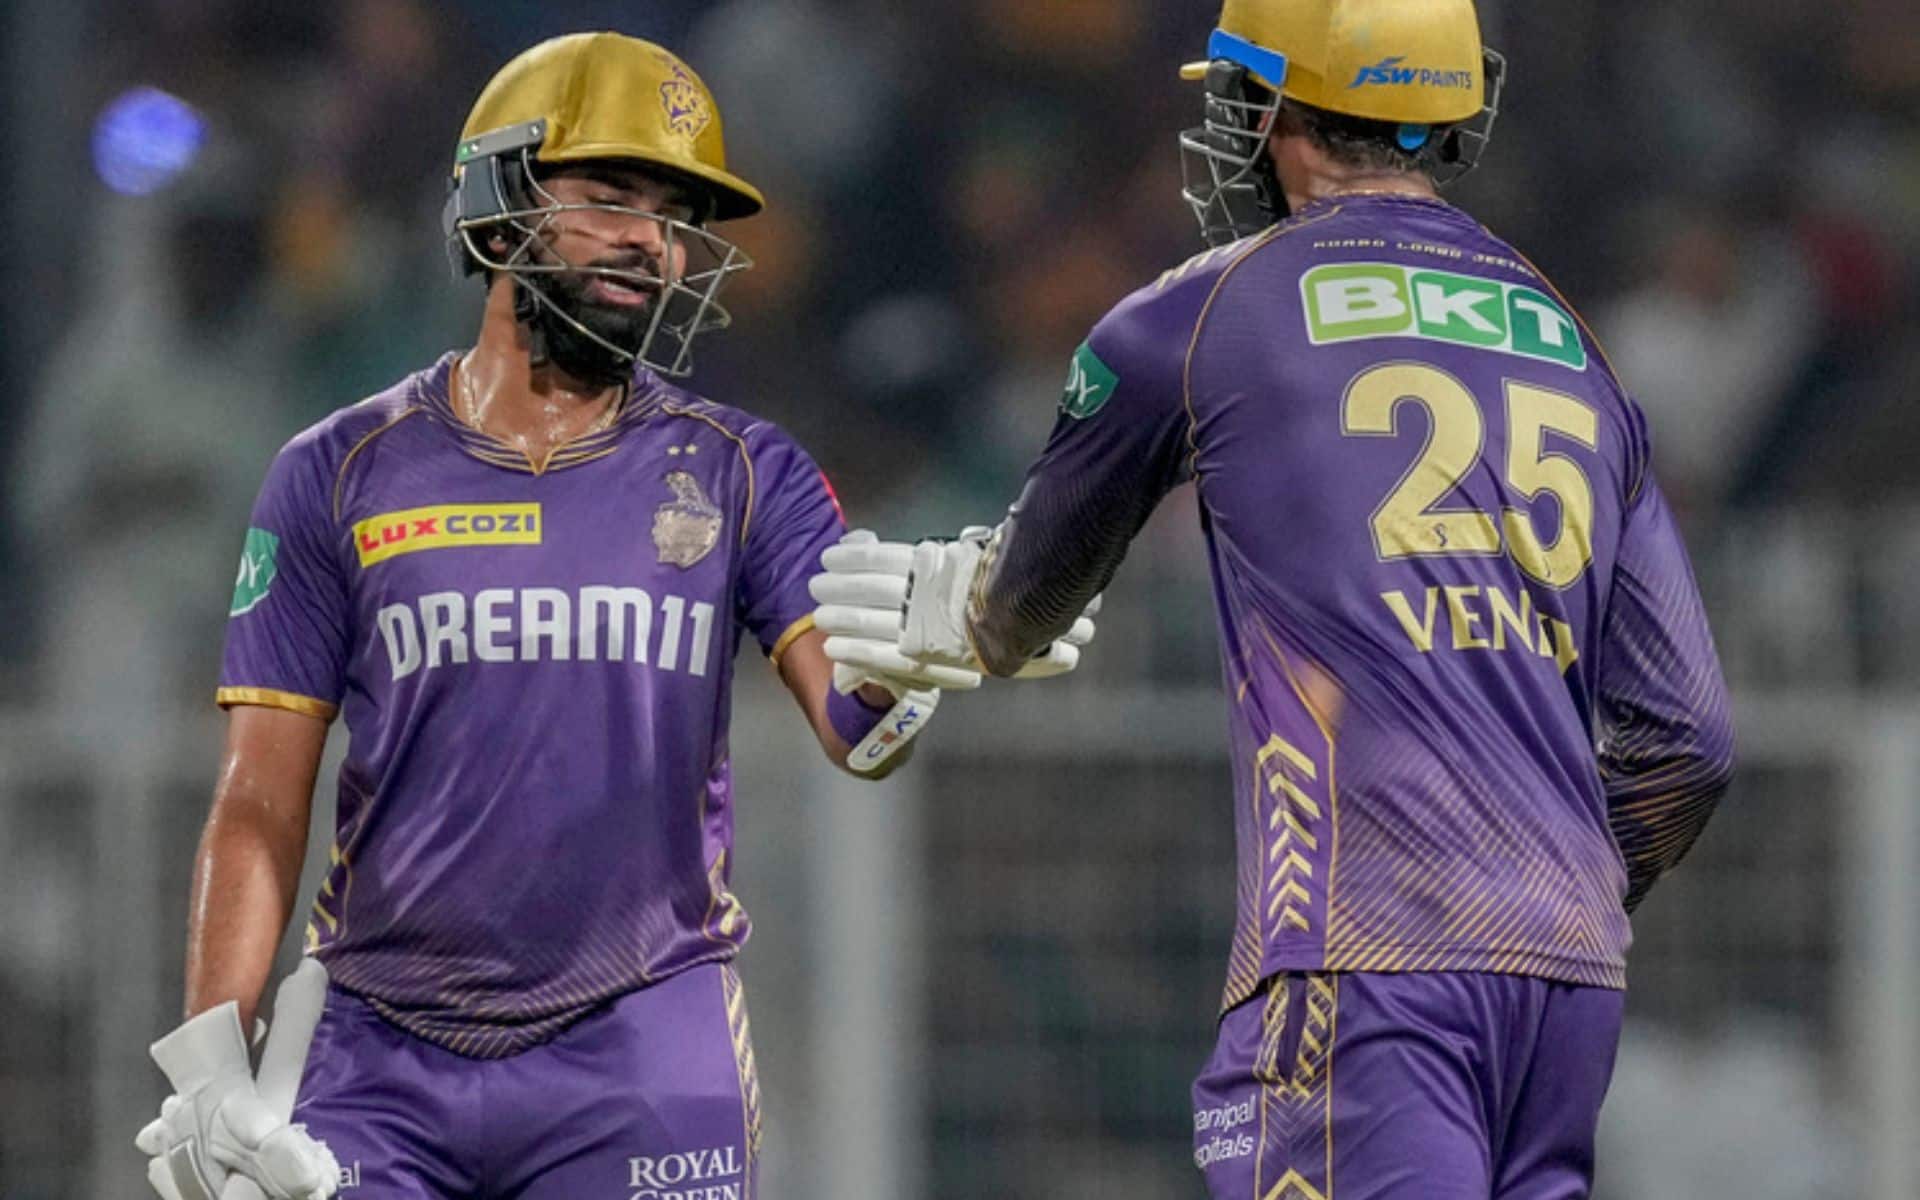 Shreyas Iyer and Venkatesh Iyer will be important to KKR's chances in the game [AP Photos]